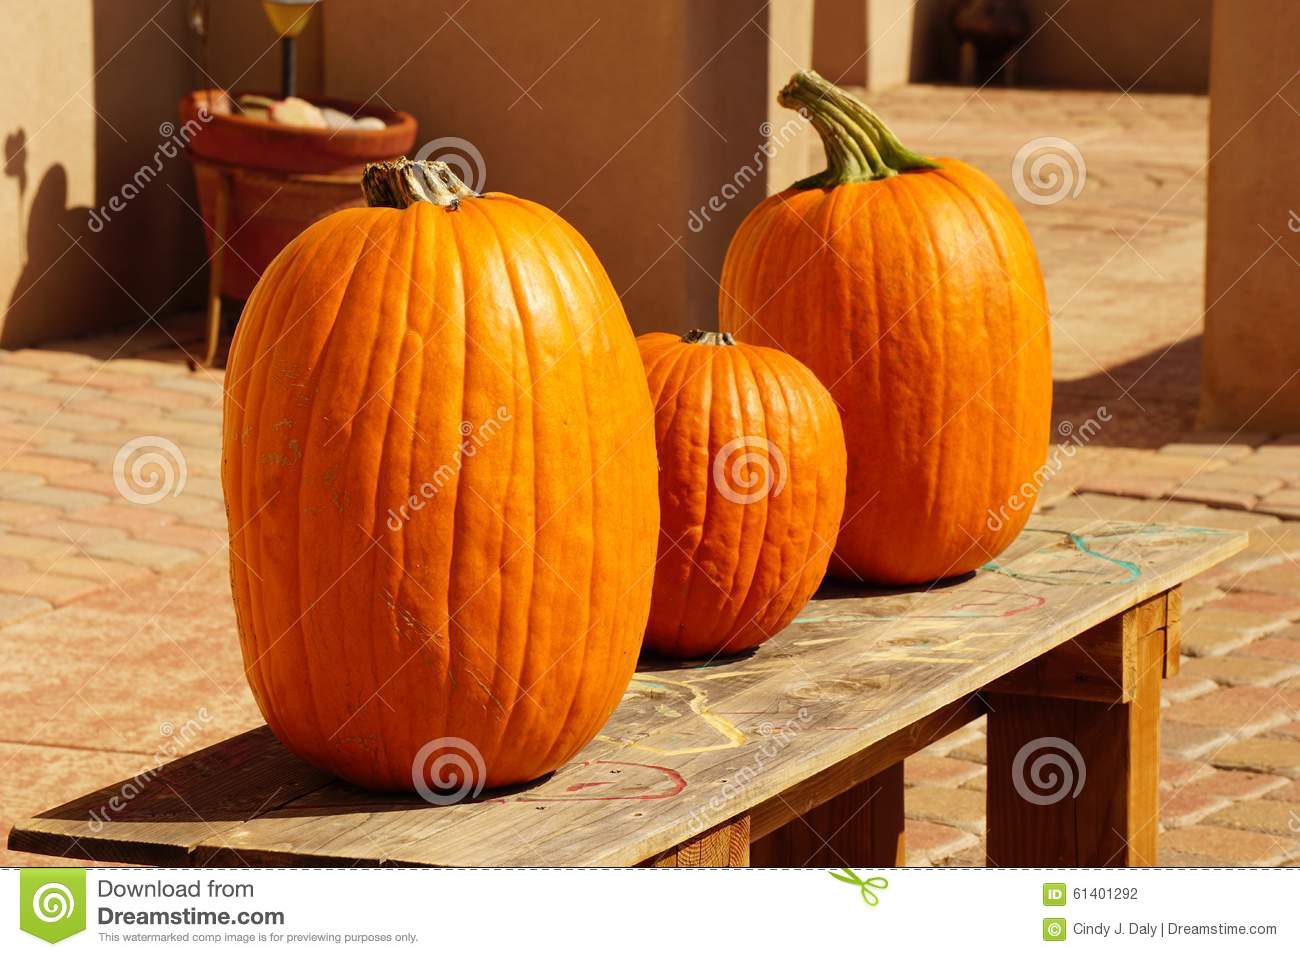 Picture Of Pumpkins Sitting On A Bench